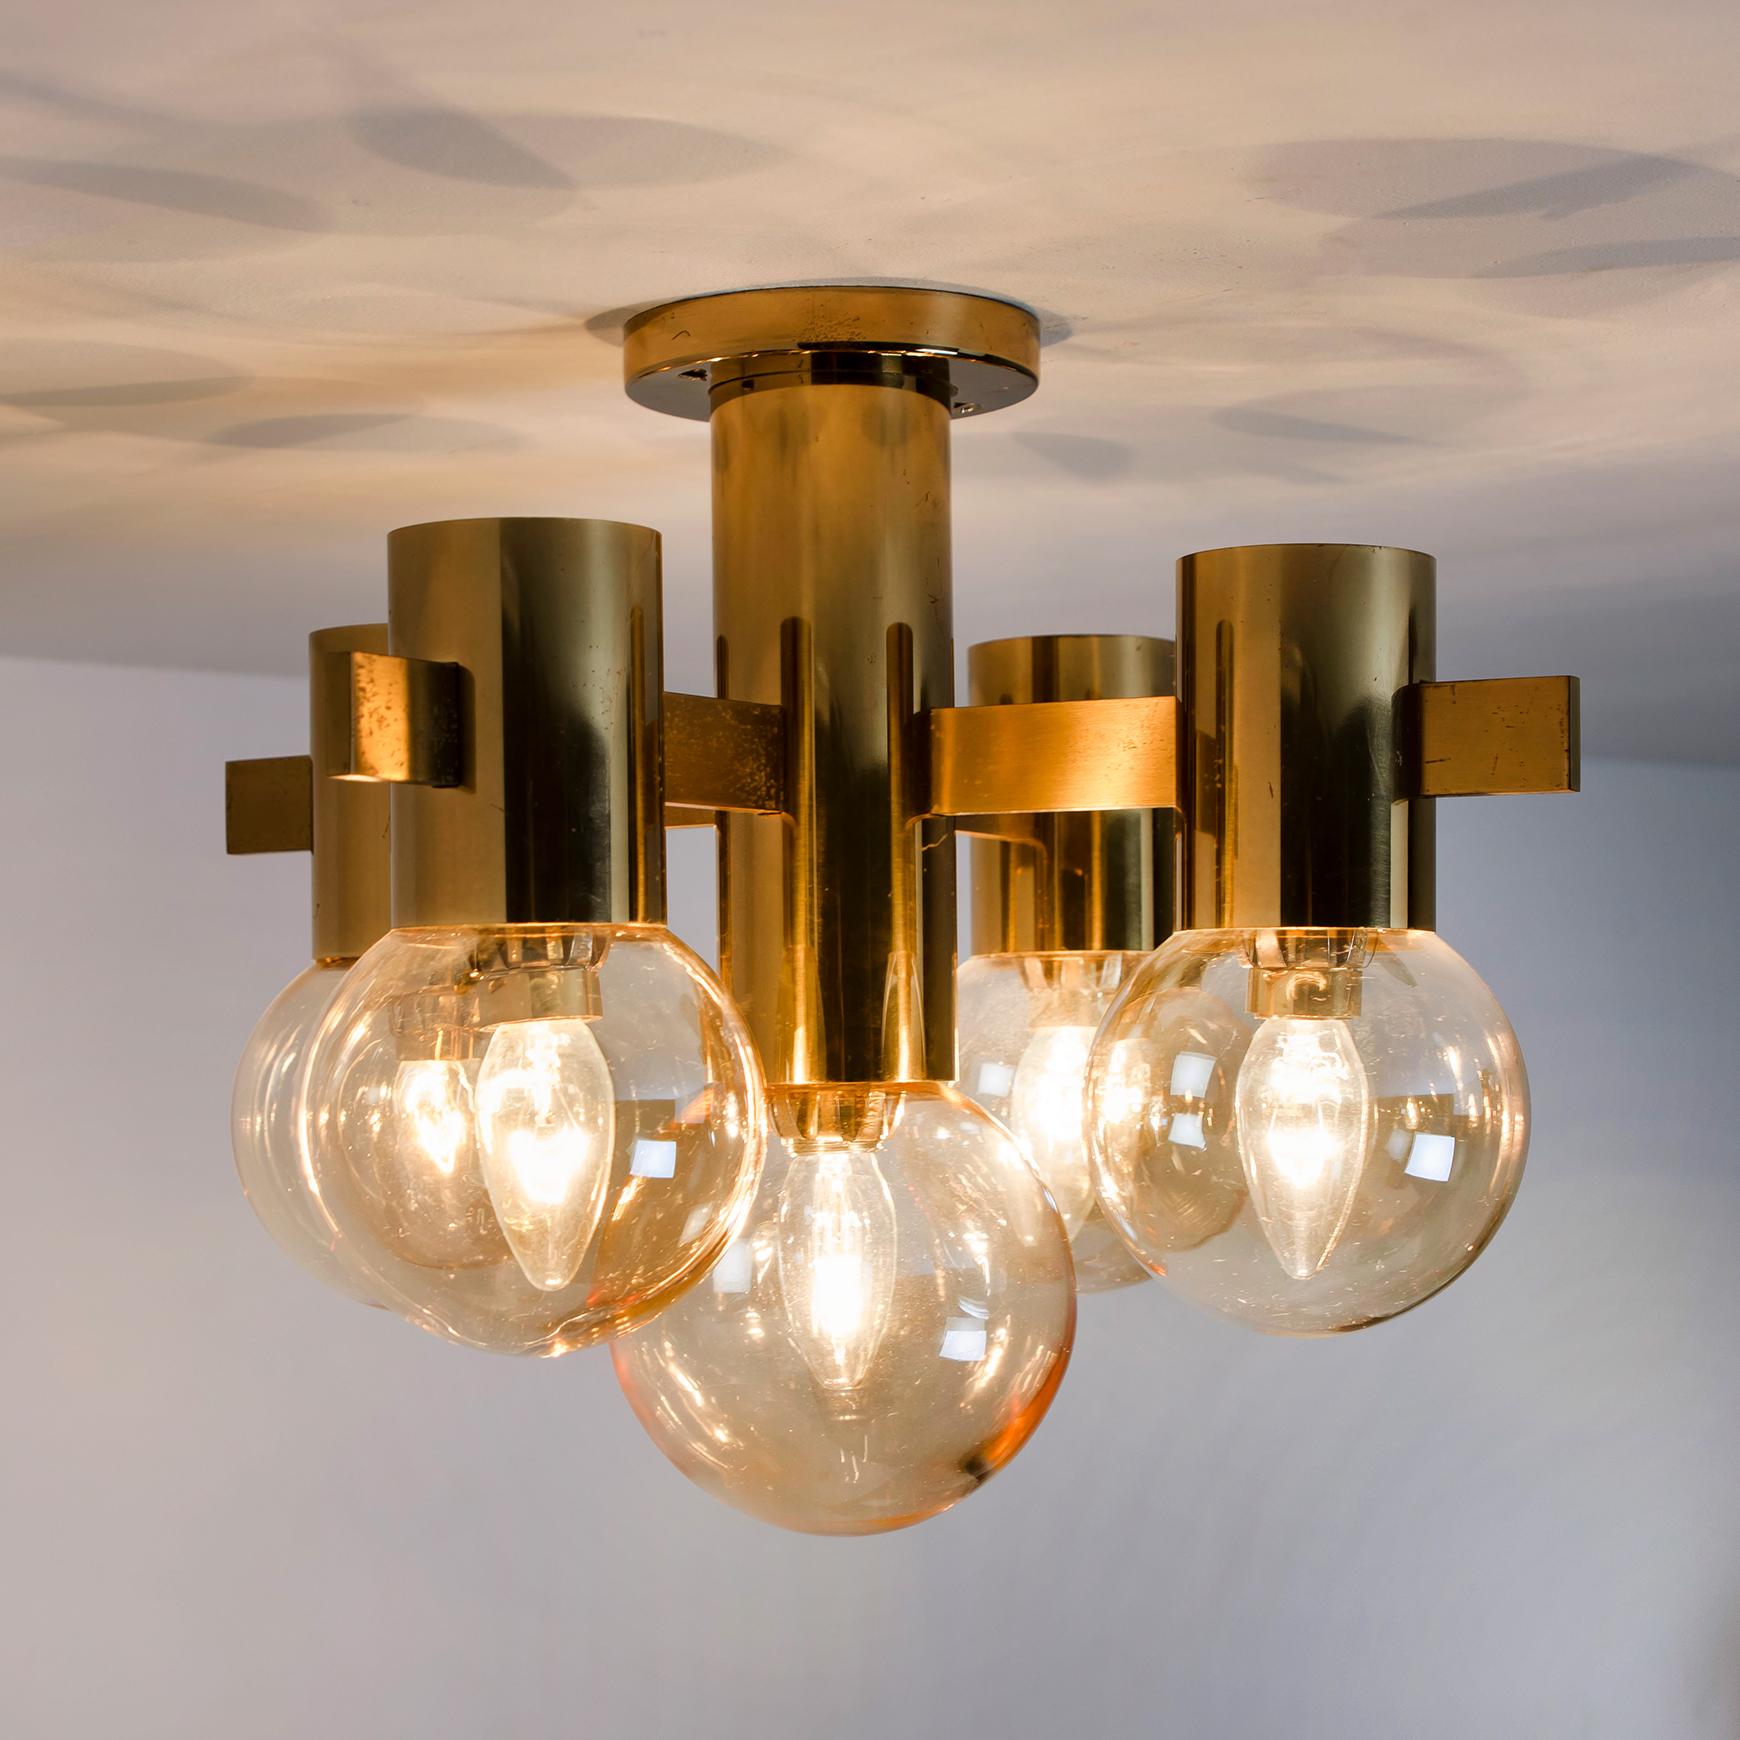 This stunning set of brass light fixtures with smoked glass bowls and gold-plated fittings was produced in the 1970s in the style of Hans-Agne Jakobsson. Illuminates beautifully.

Size of the flushmount small:
Depth 18.1